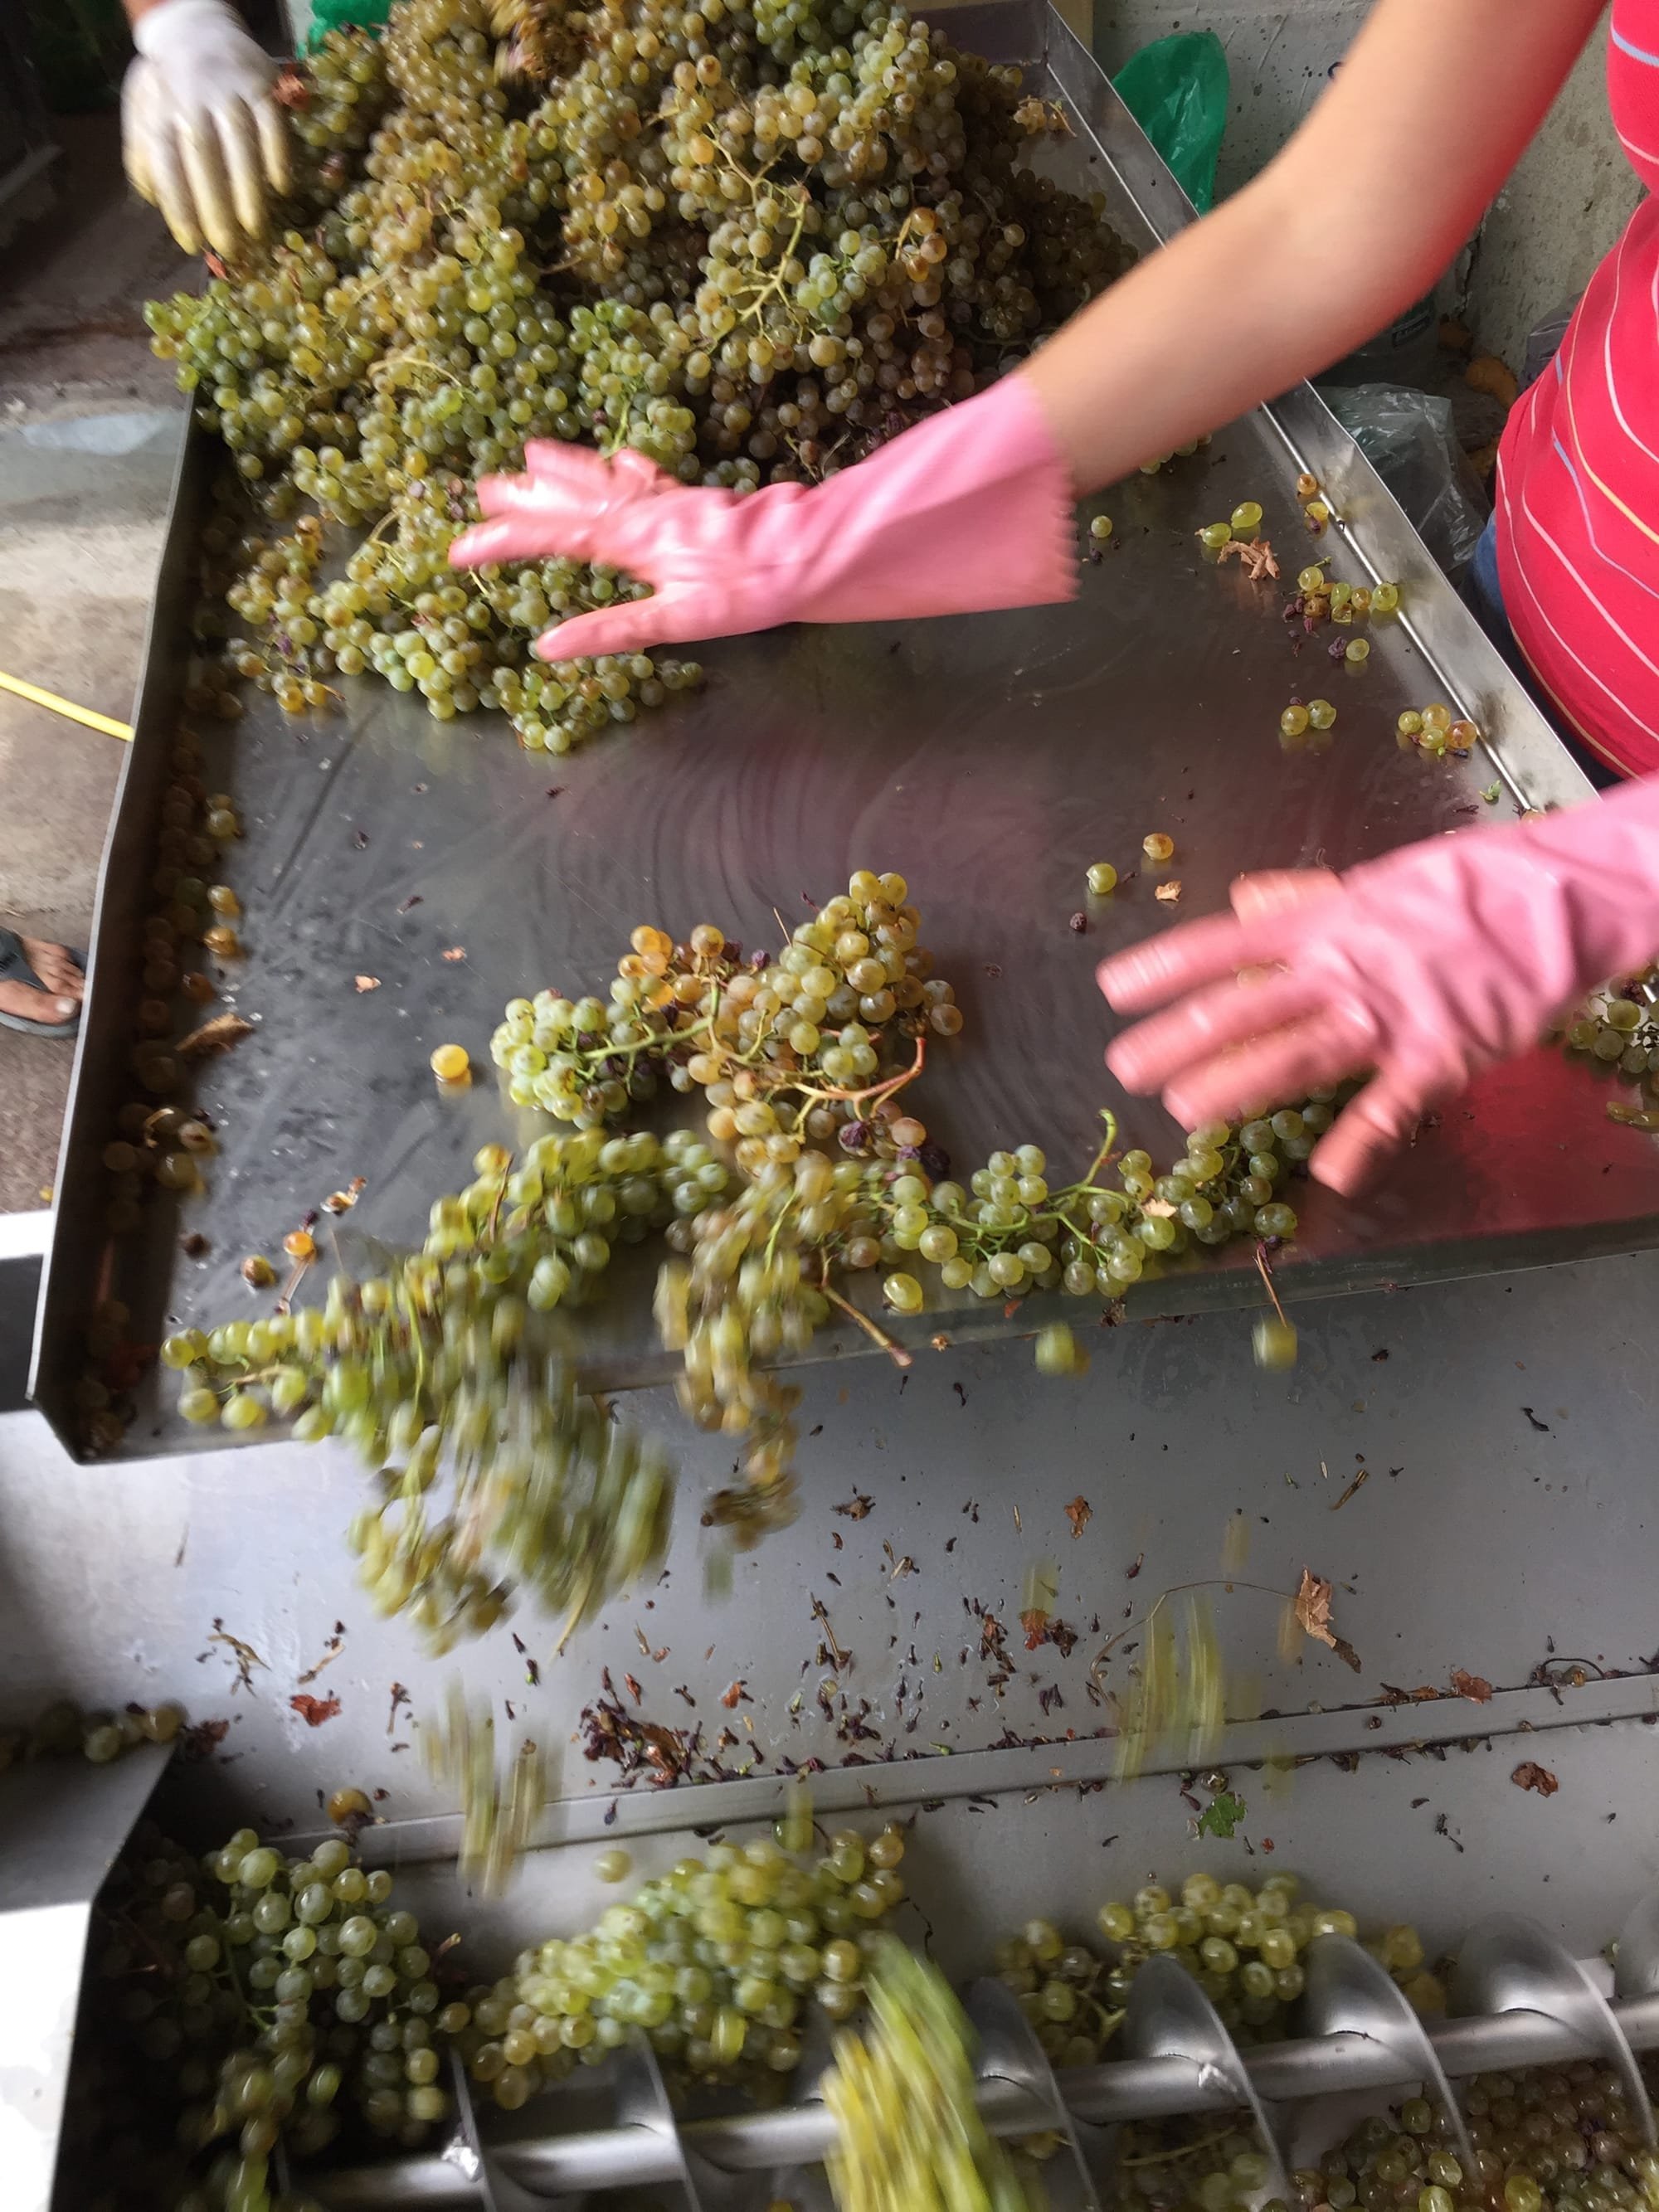 How we select only the best quality grapes and process them